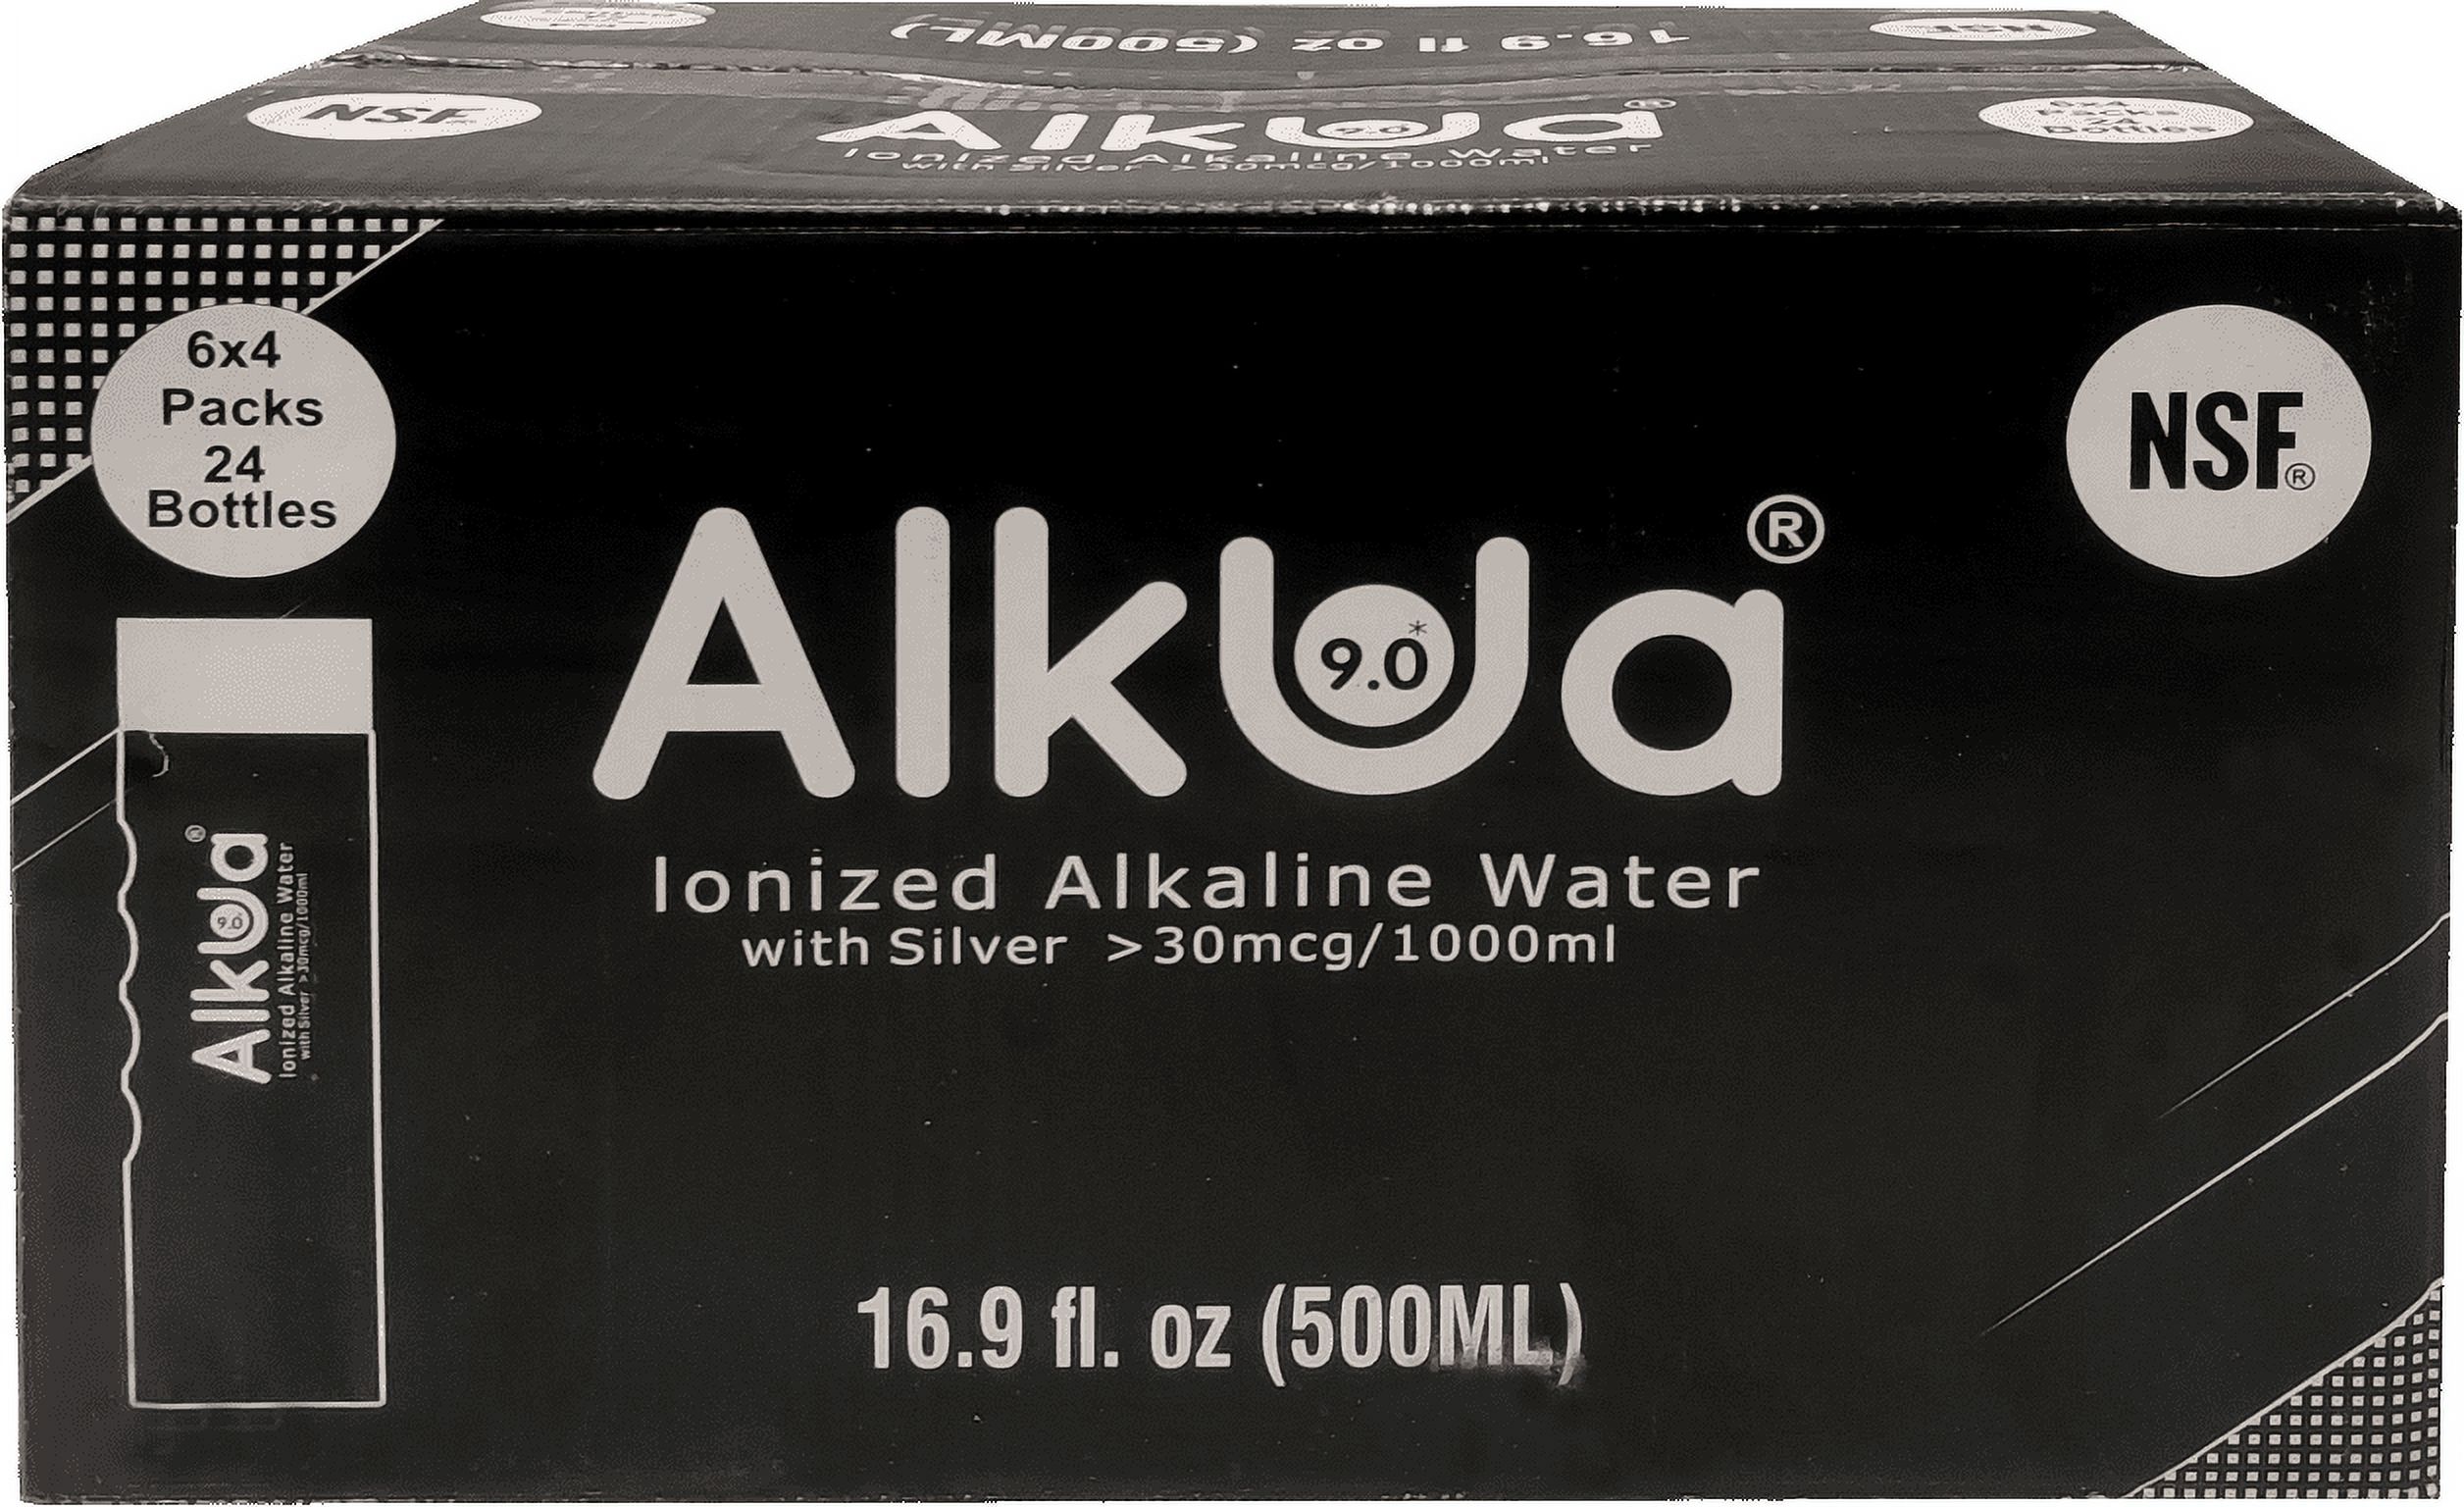 Alkua Alkaline Ionized Water | 9 pH with Silver > 30 mcg Per Liter | 500ml Bottle (24 Pack) - image 4 of 7